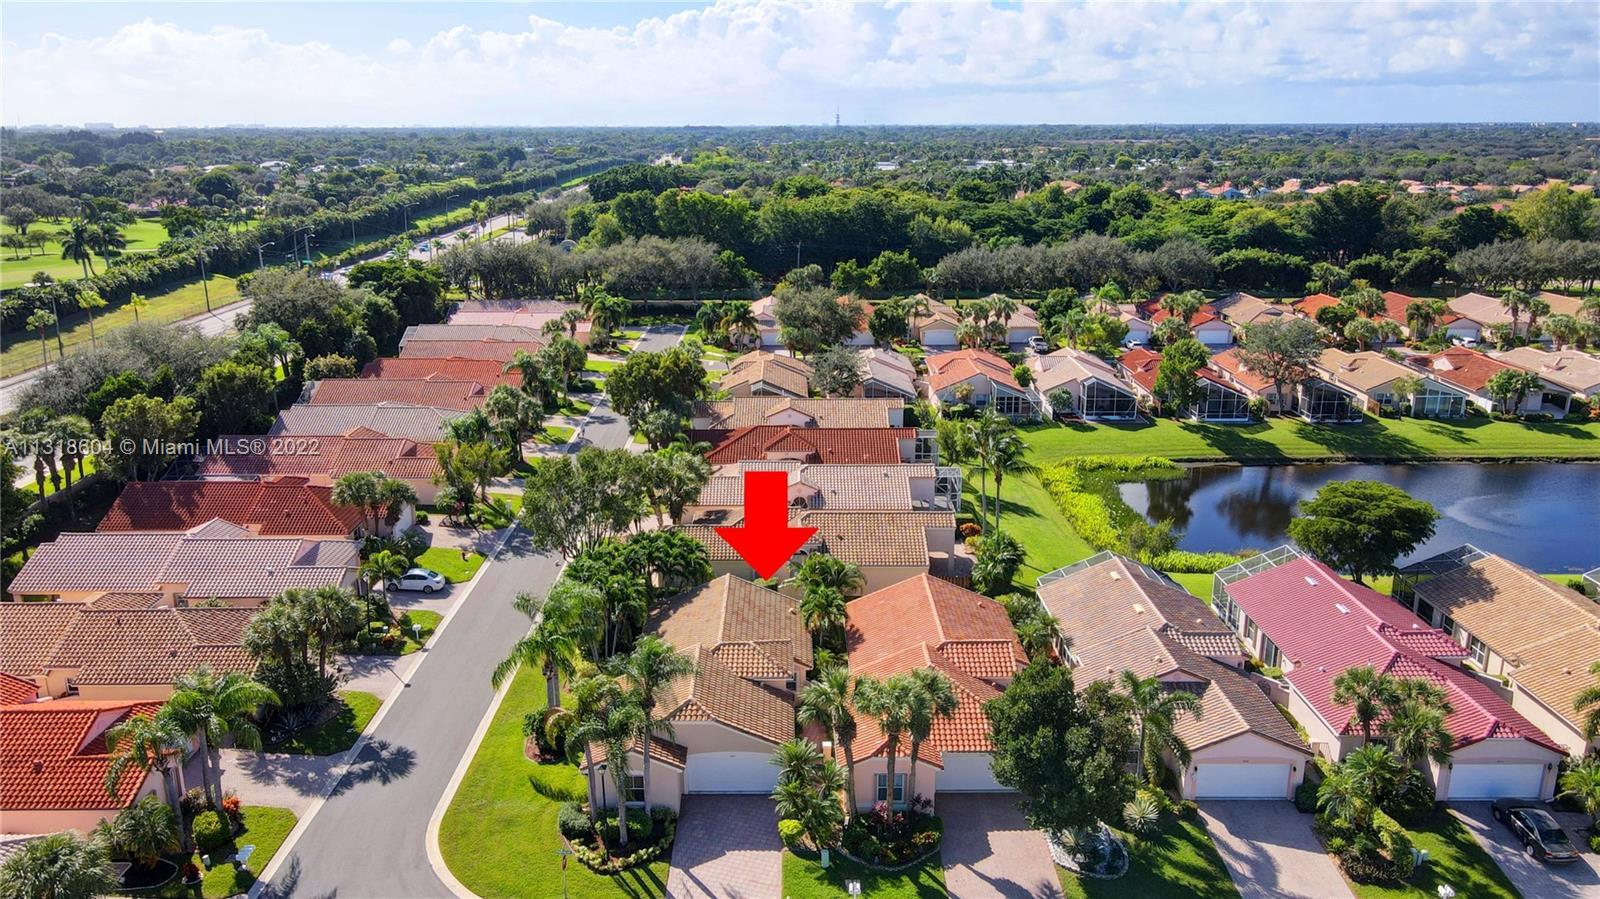 Amazing opportunity to own a corner lot in the impeccably maintained, guard gated community of Casca